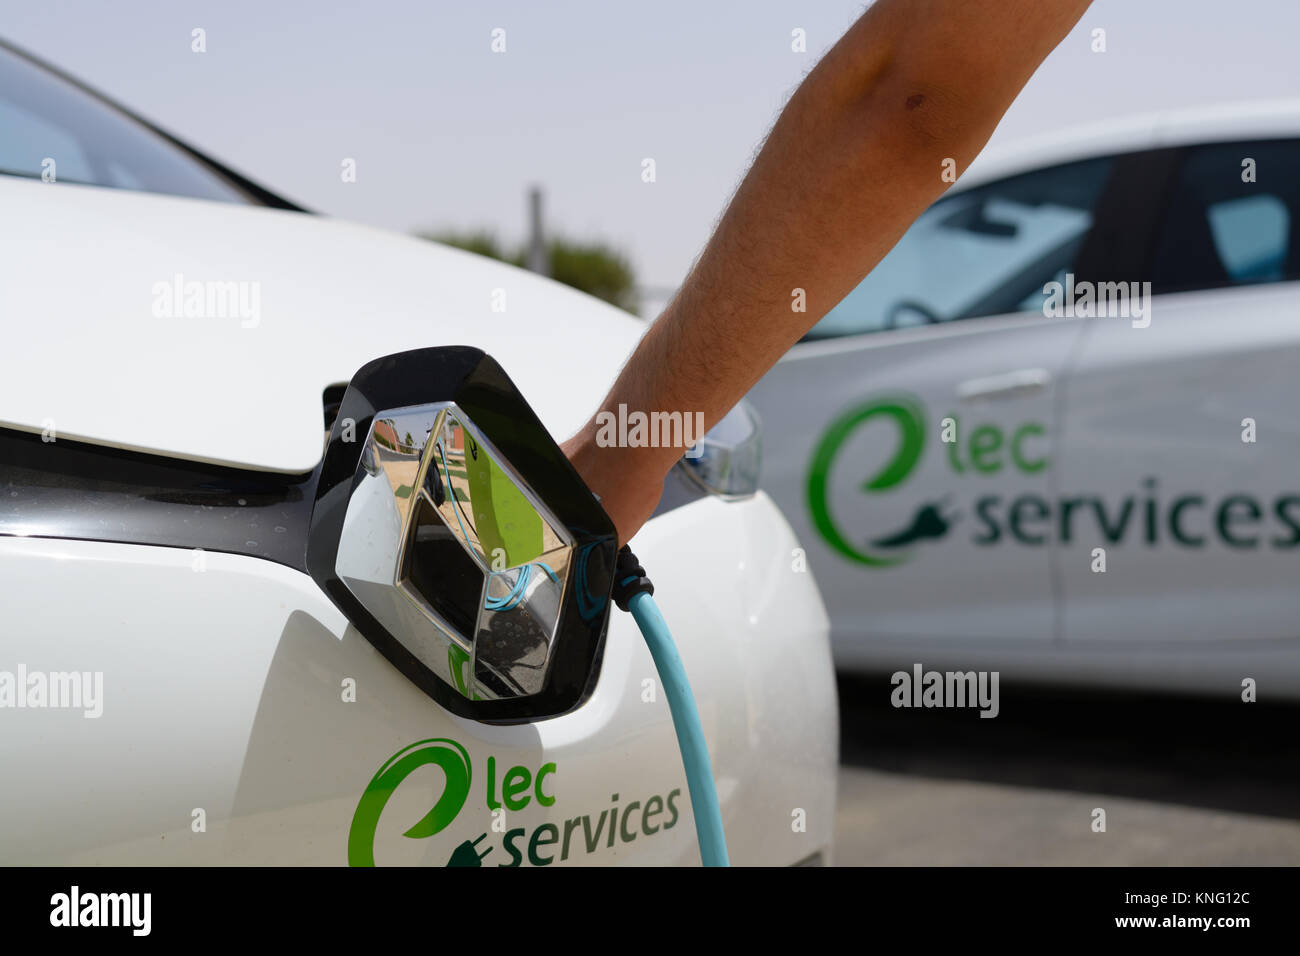 Handheld charging for electric vehicles Stock Photo